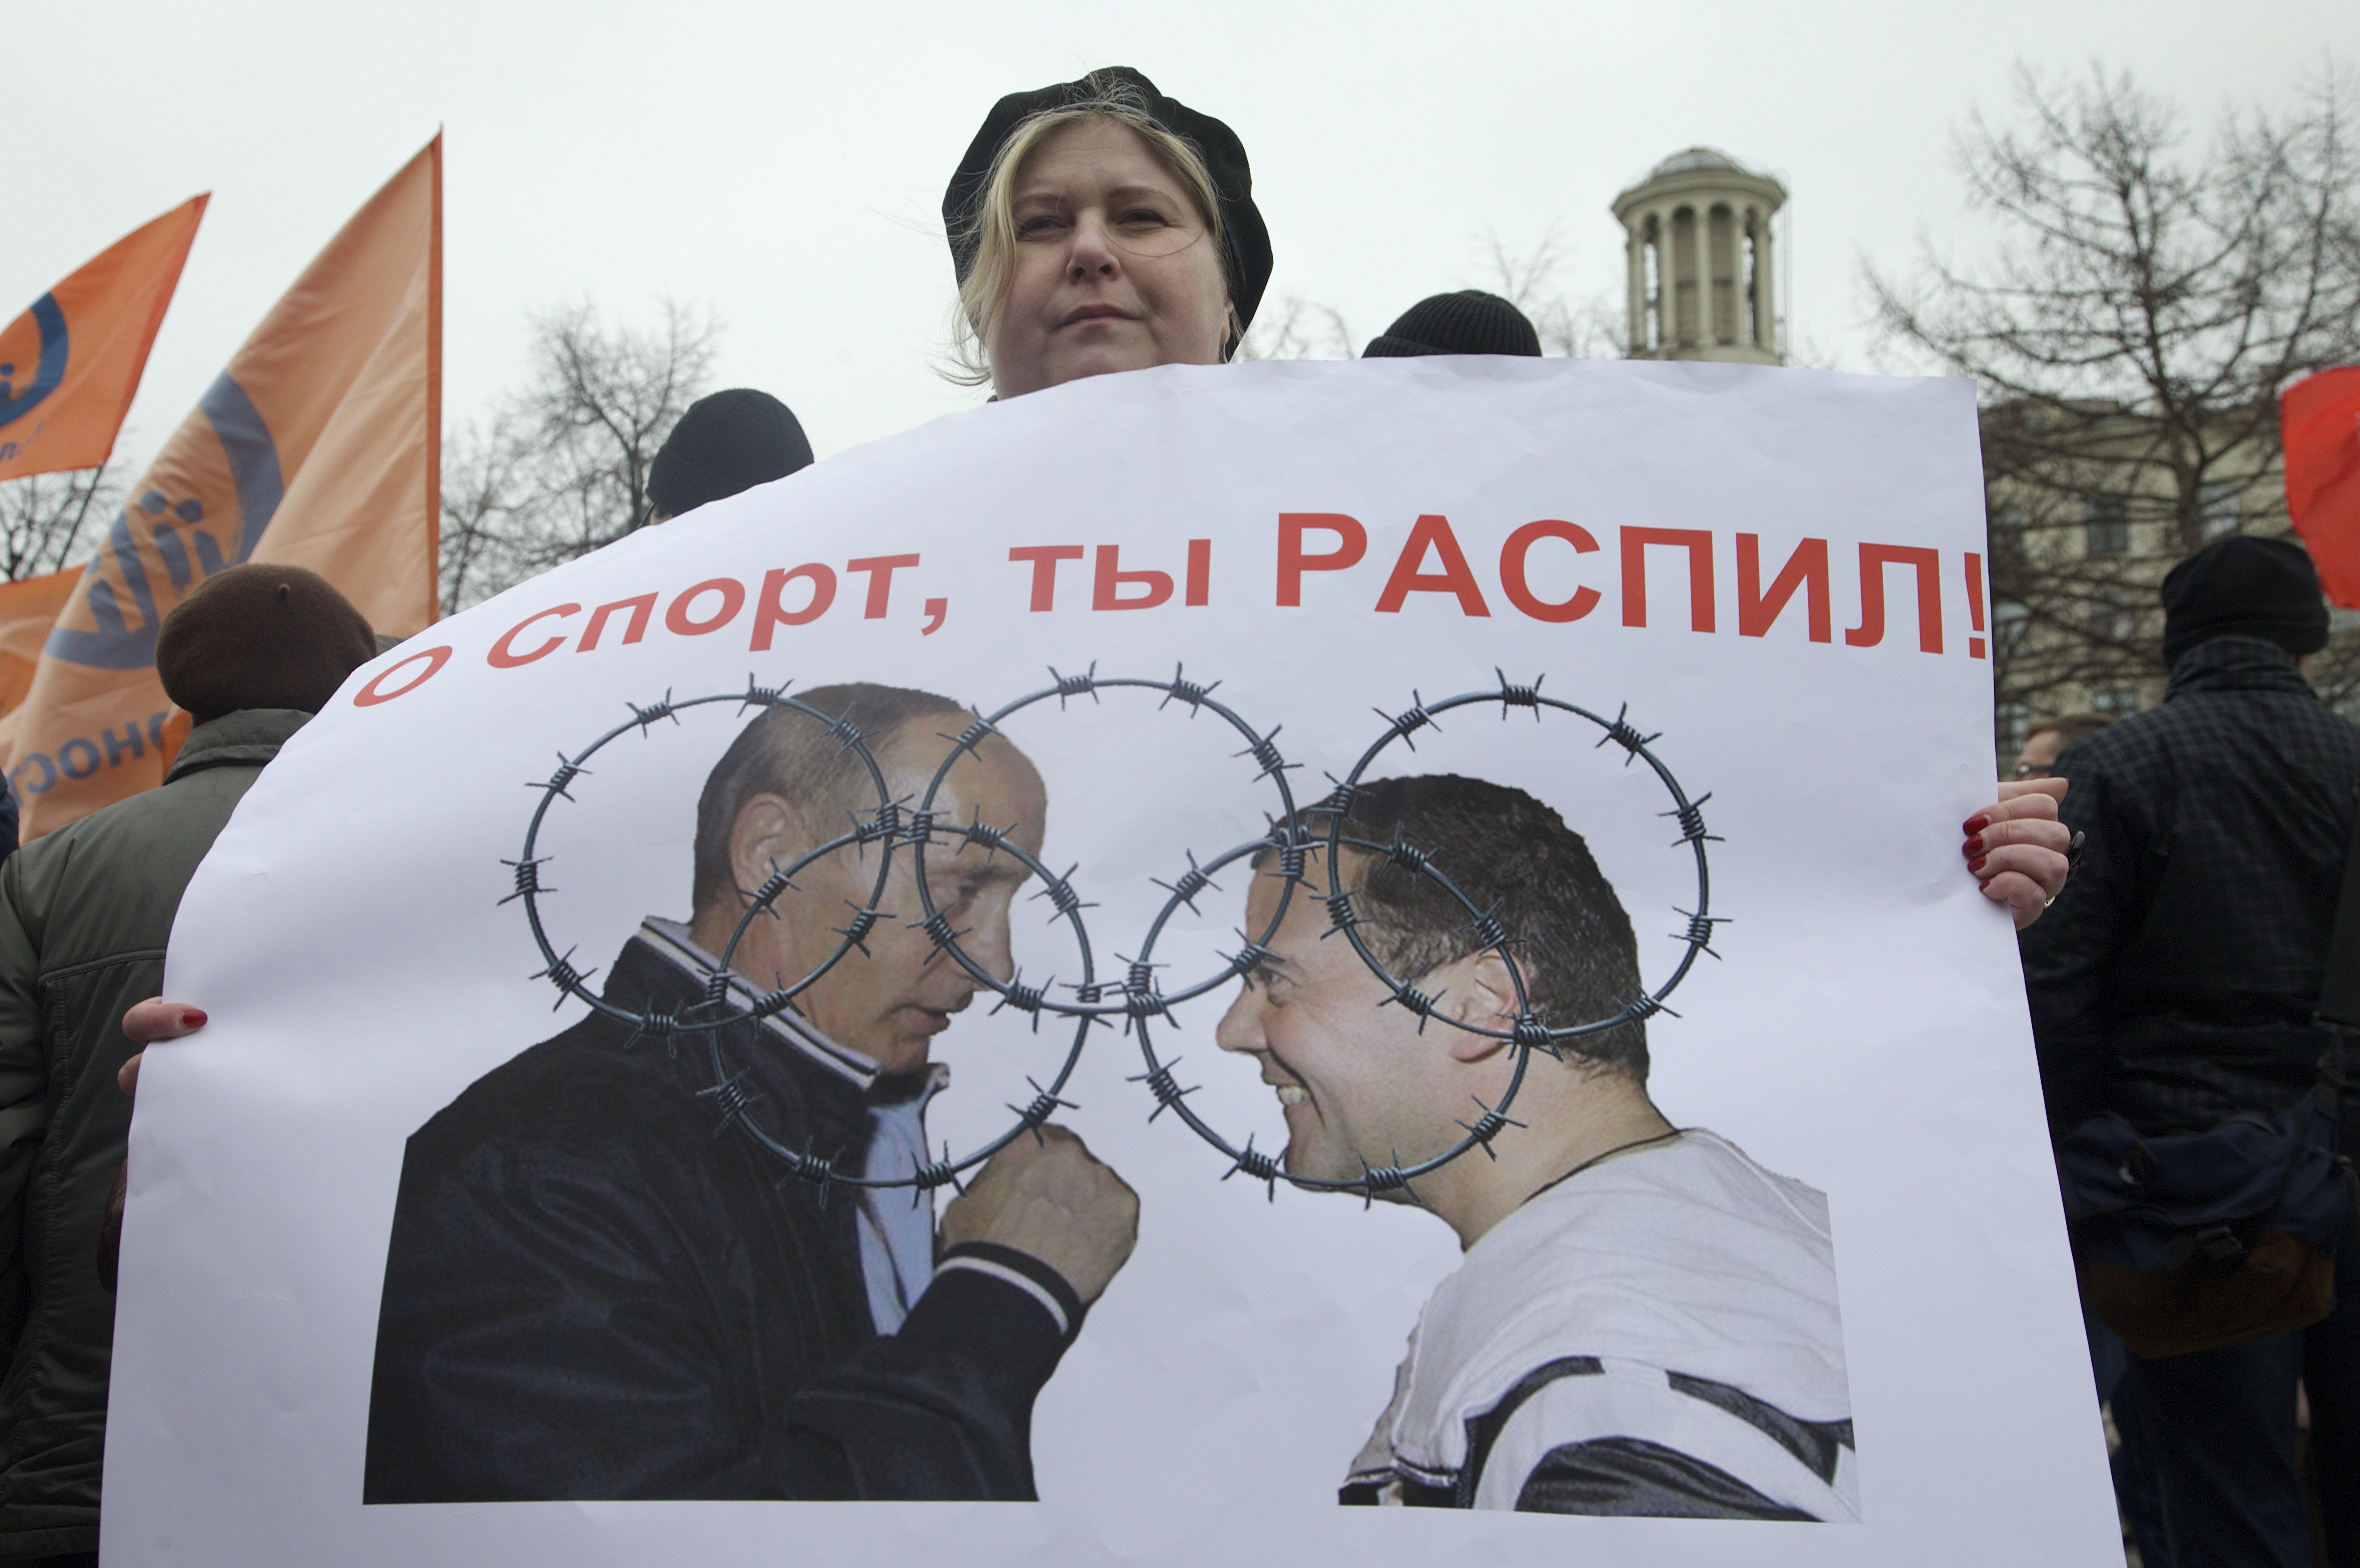 6 April 2013, Russia. During a rally in Moscow, a demonstrator holds an anti-corruption poster showing Russian President Vladimir Putin and Prime Minister Dimitry Medvedev overlayed with the Olympic rings in barbed wire.